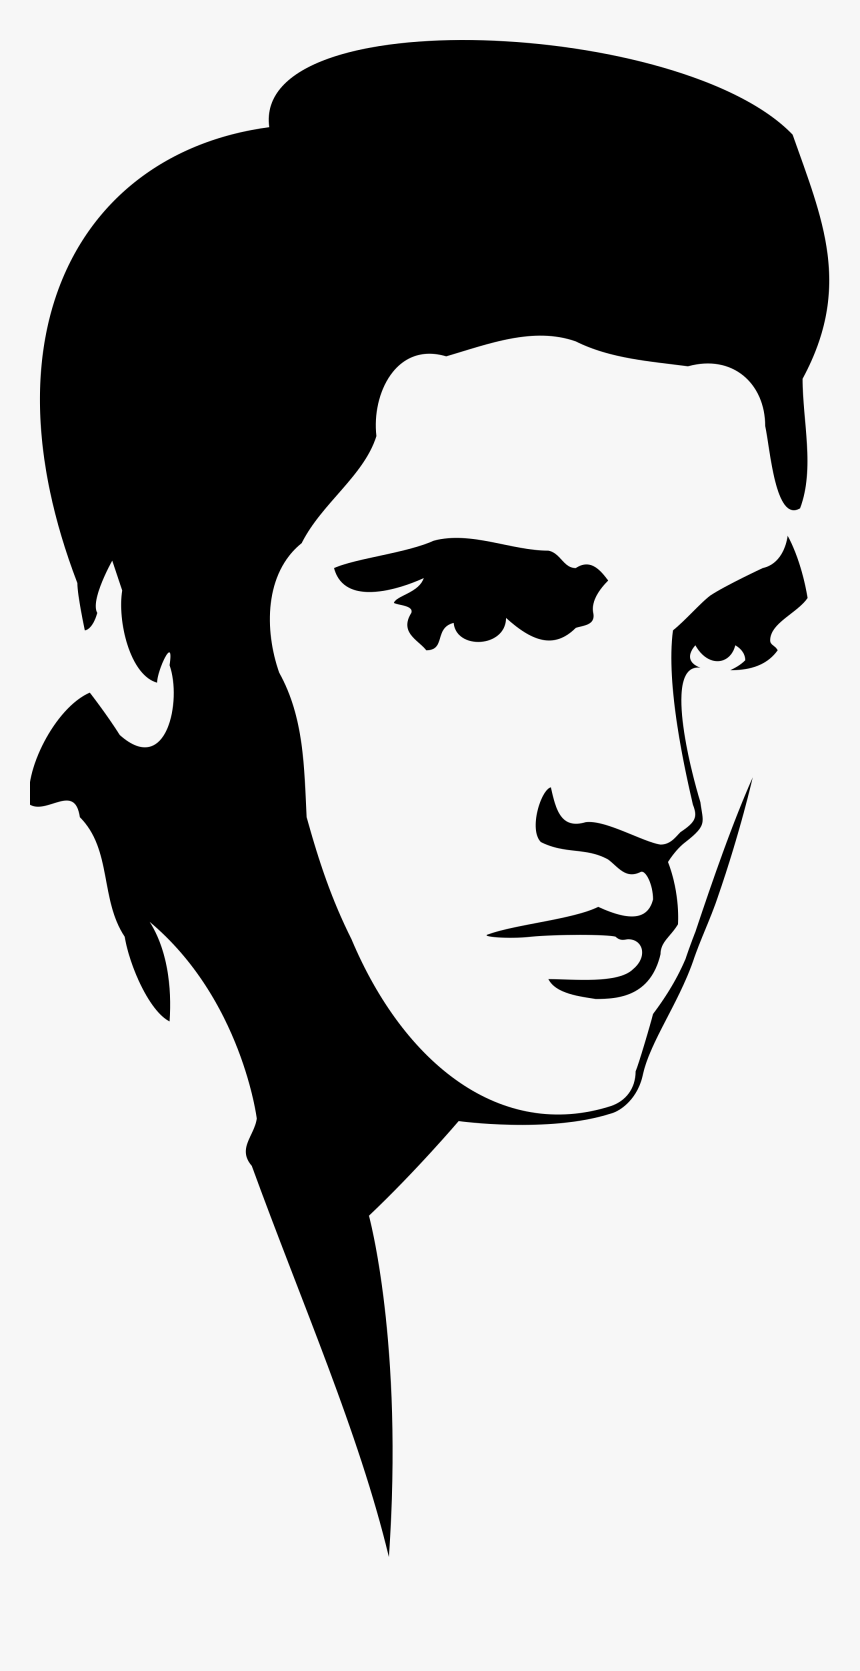 Transparent Singing Silhouette Png - Elvis Silhouette, Png Download, Free Download